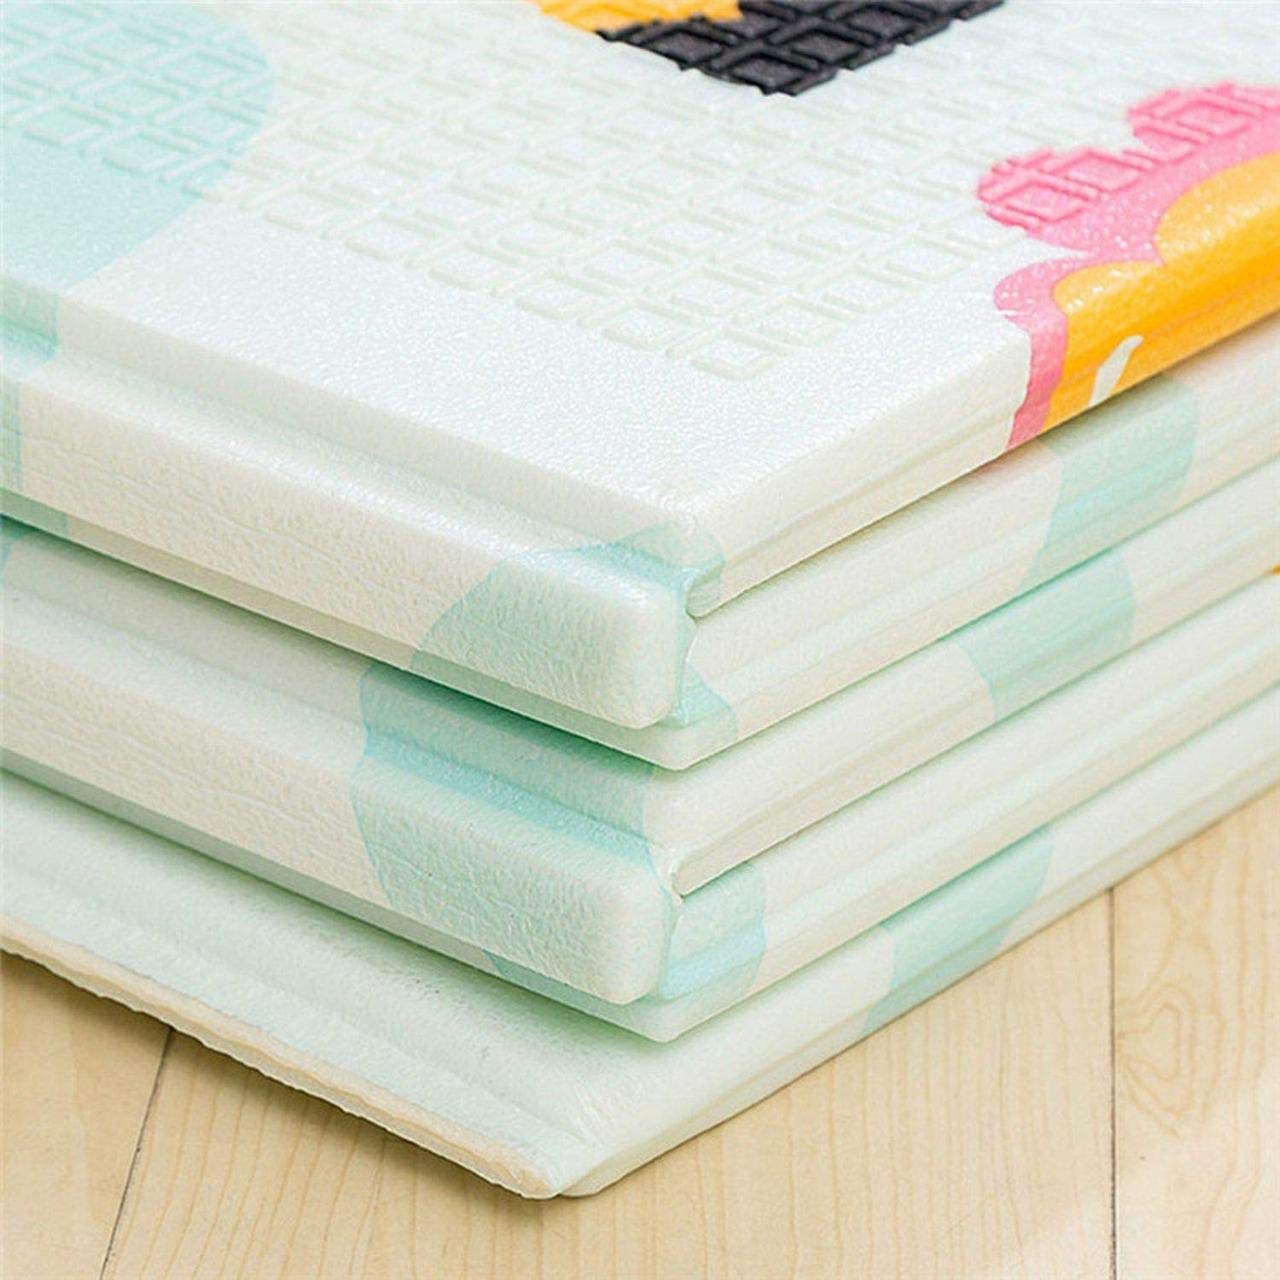 Double Sided Water-proof Foldable Baby Crawling Floor Play Mat. Multi-Purpose Floor Mat for Baby, Extra Thick Foam Mat 6X5 Feet (Assorted Prints)